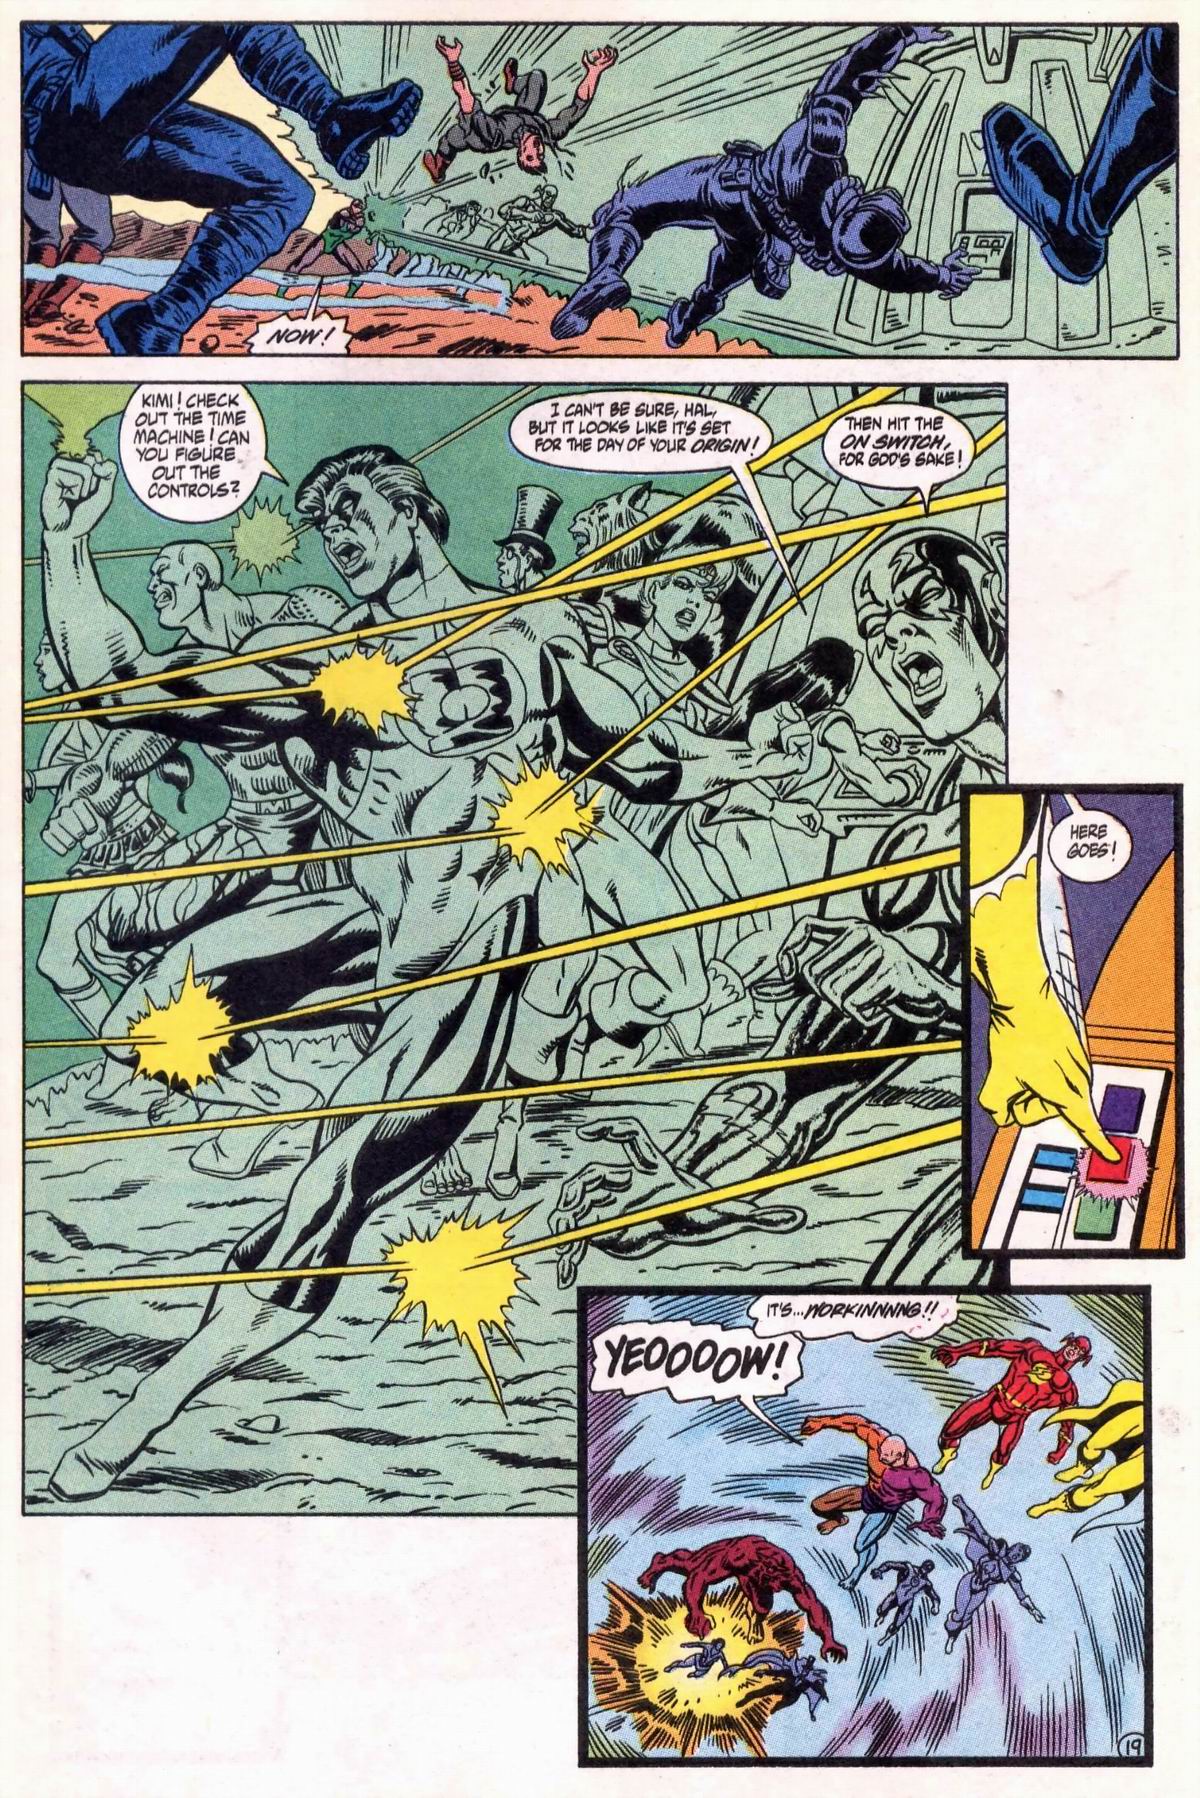 Justice League International (1993) 60 Page 20